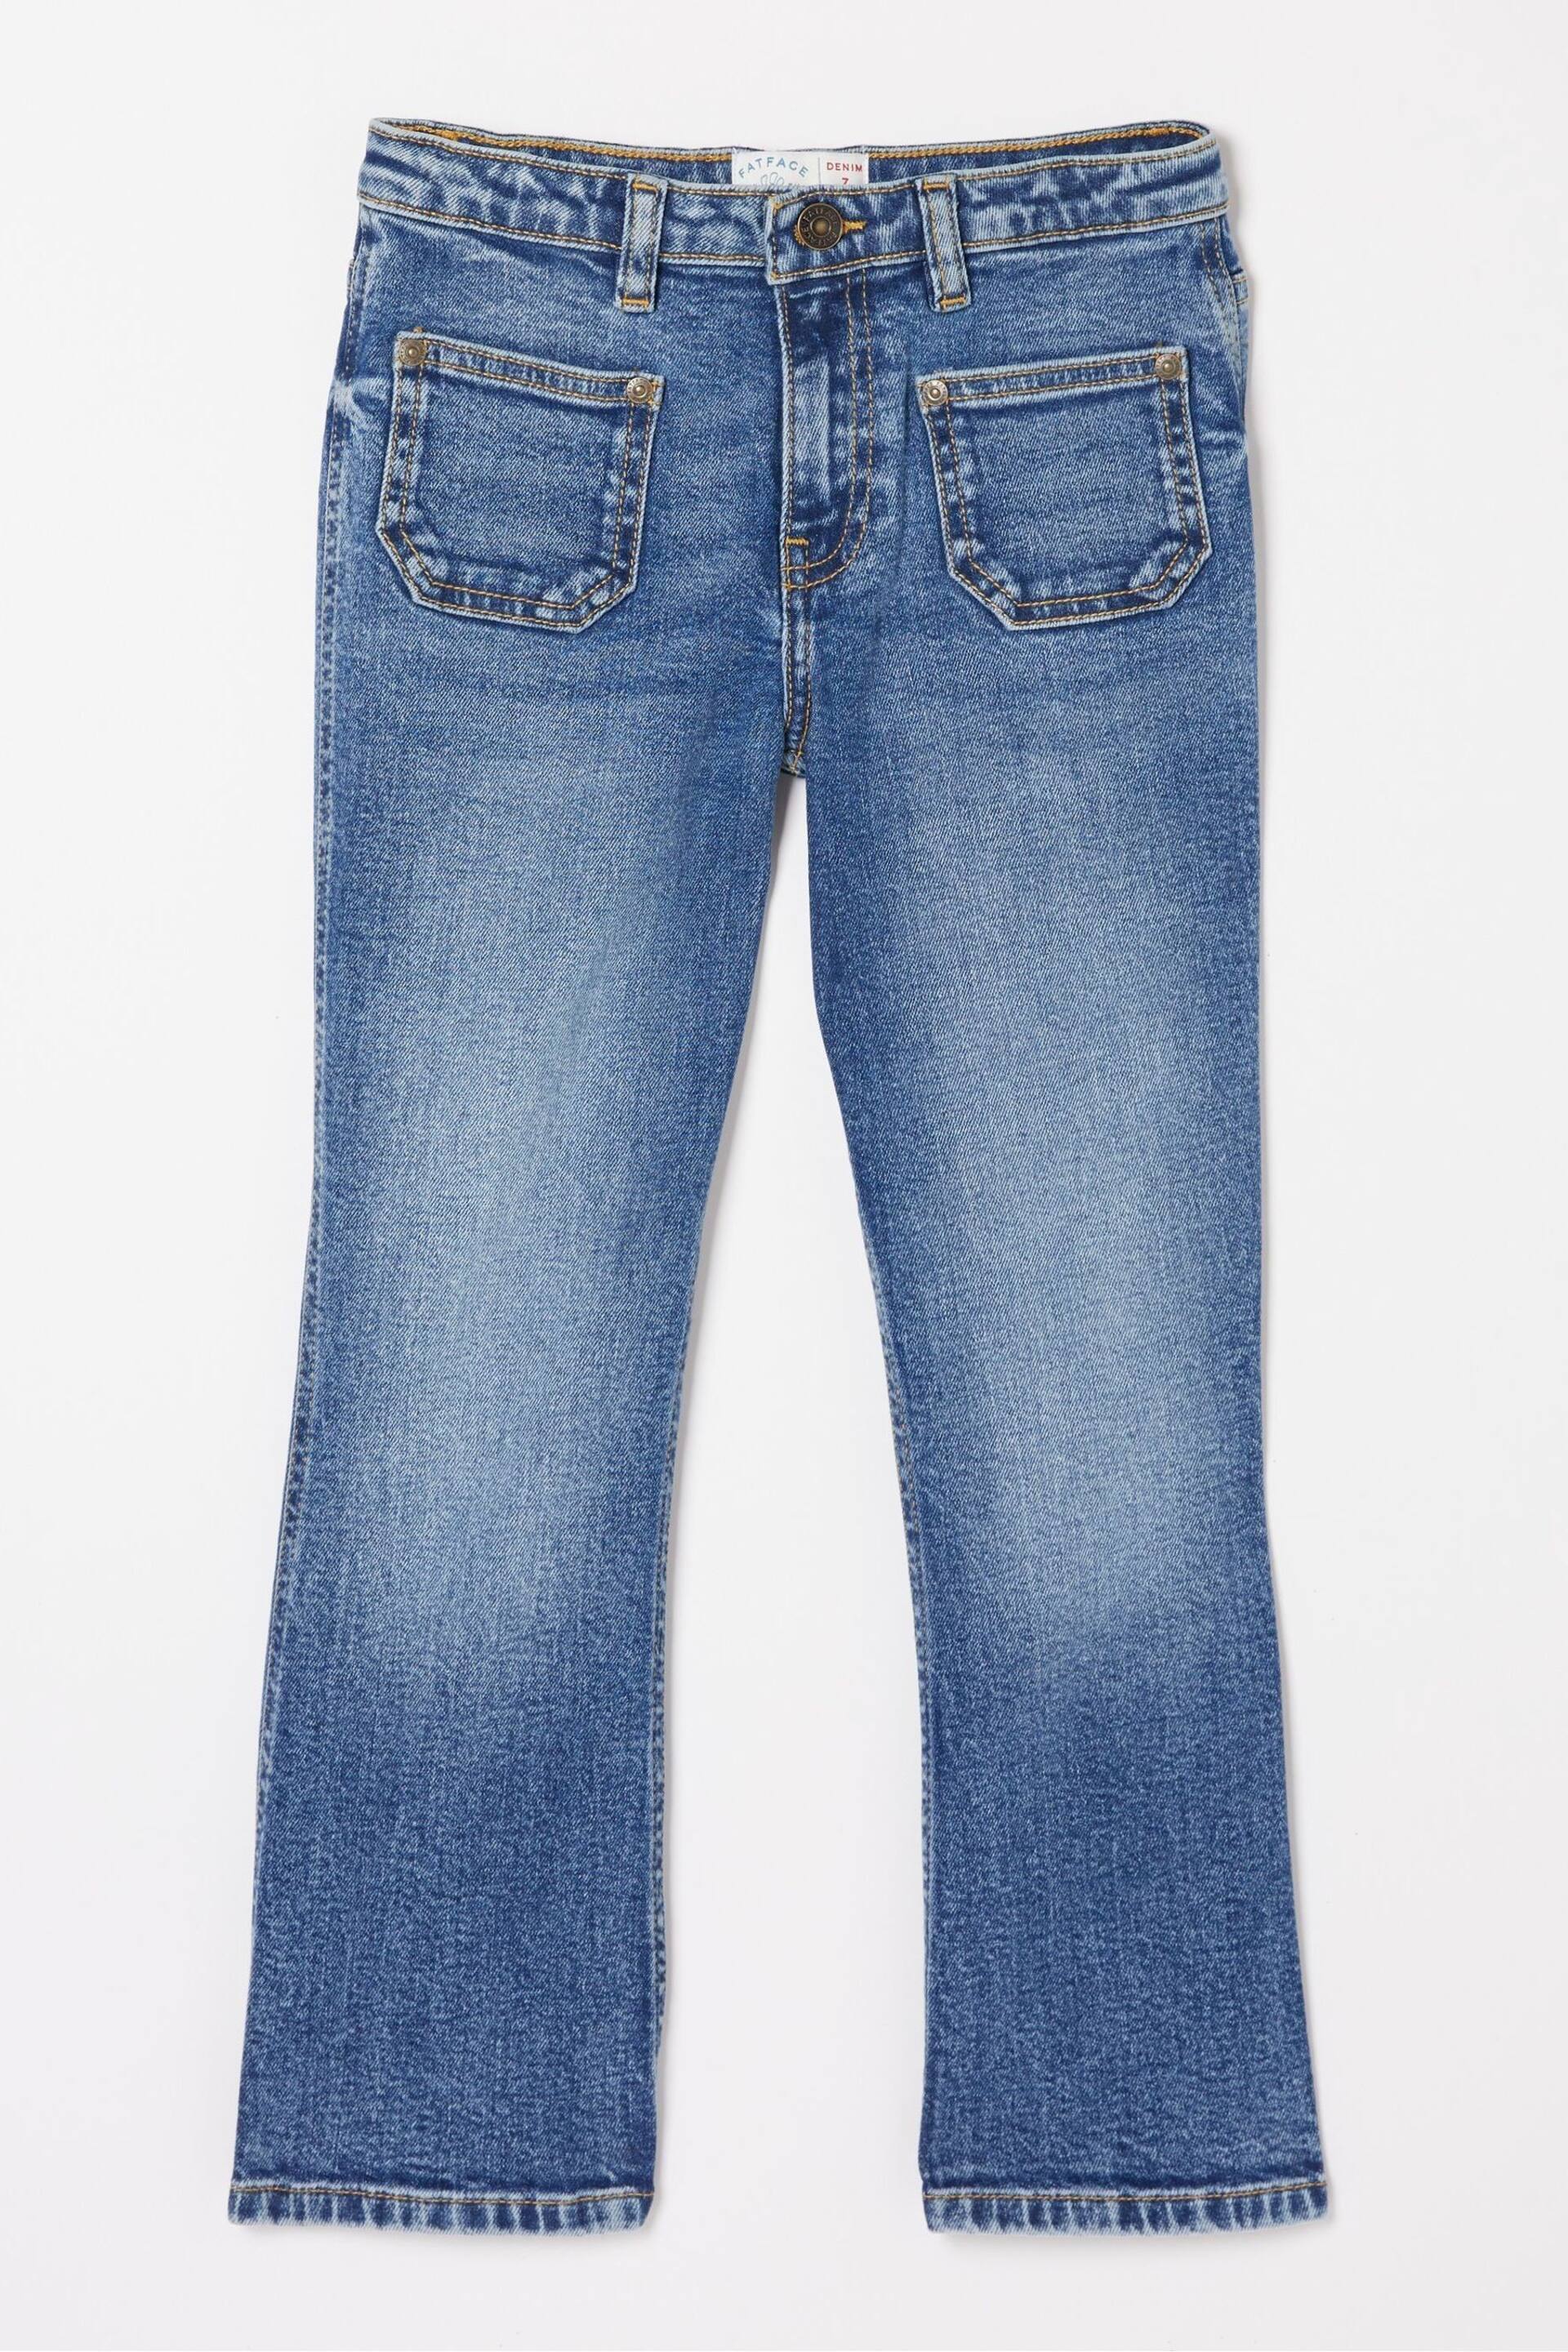 FatFace Blue Flared Denim Jeans - Image 5 of 5